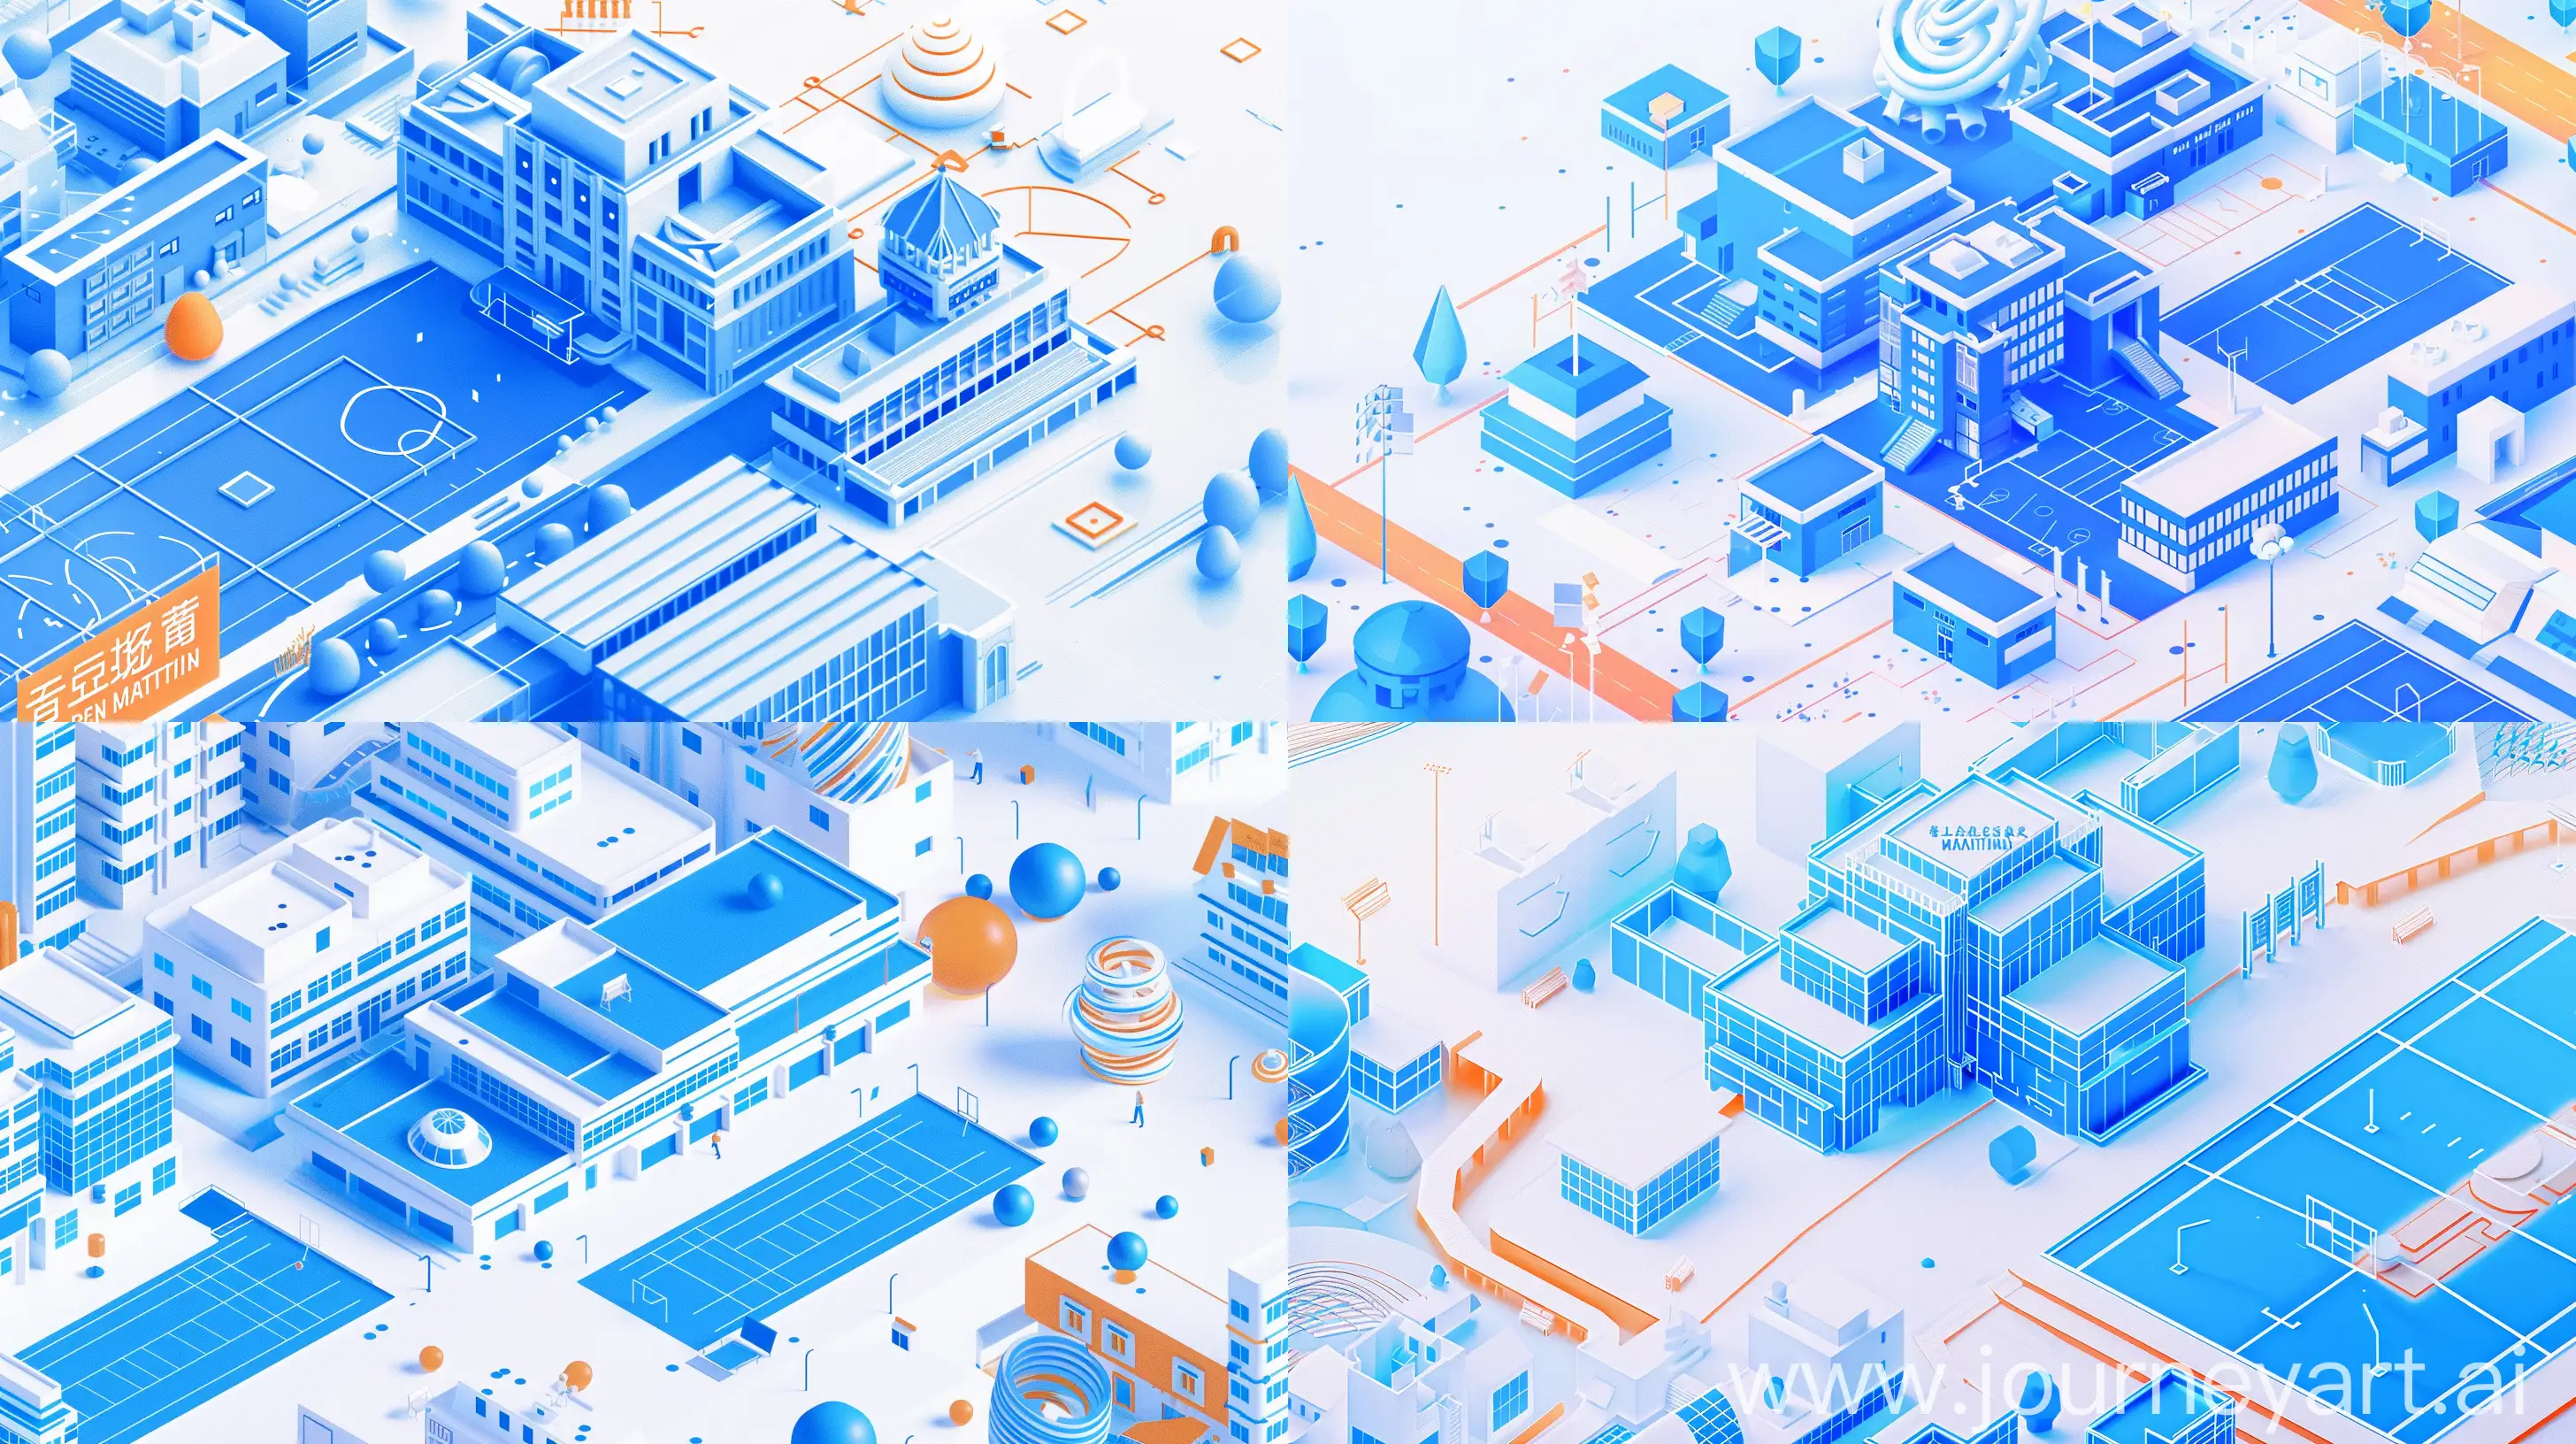 a banner, a building, a 3d isometric image of blue school, 16-year-olds Chinese Childrens, Chinese Senior High School. an athletic field. The background is white. blue icons and blue city streets, in the style of dan matutina, light white and light orange, minimalist detail, interactive installation, spiral group, contact printing, minimalistic elements --ar 16:9